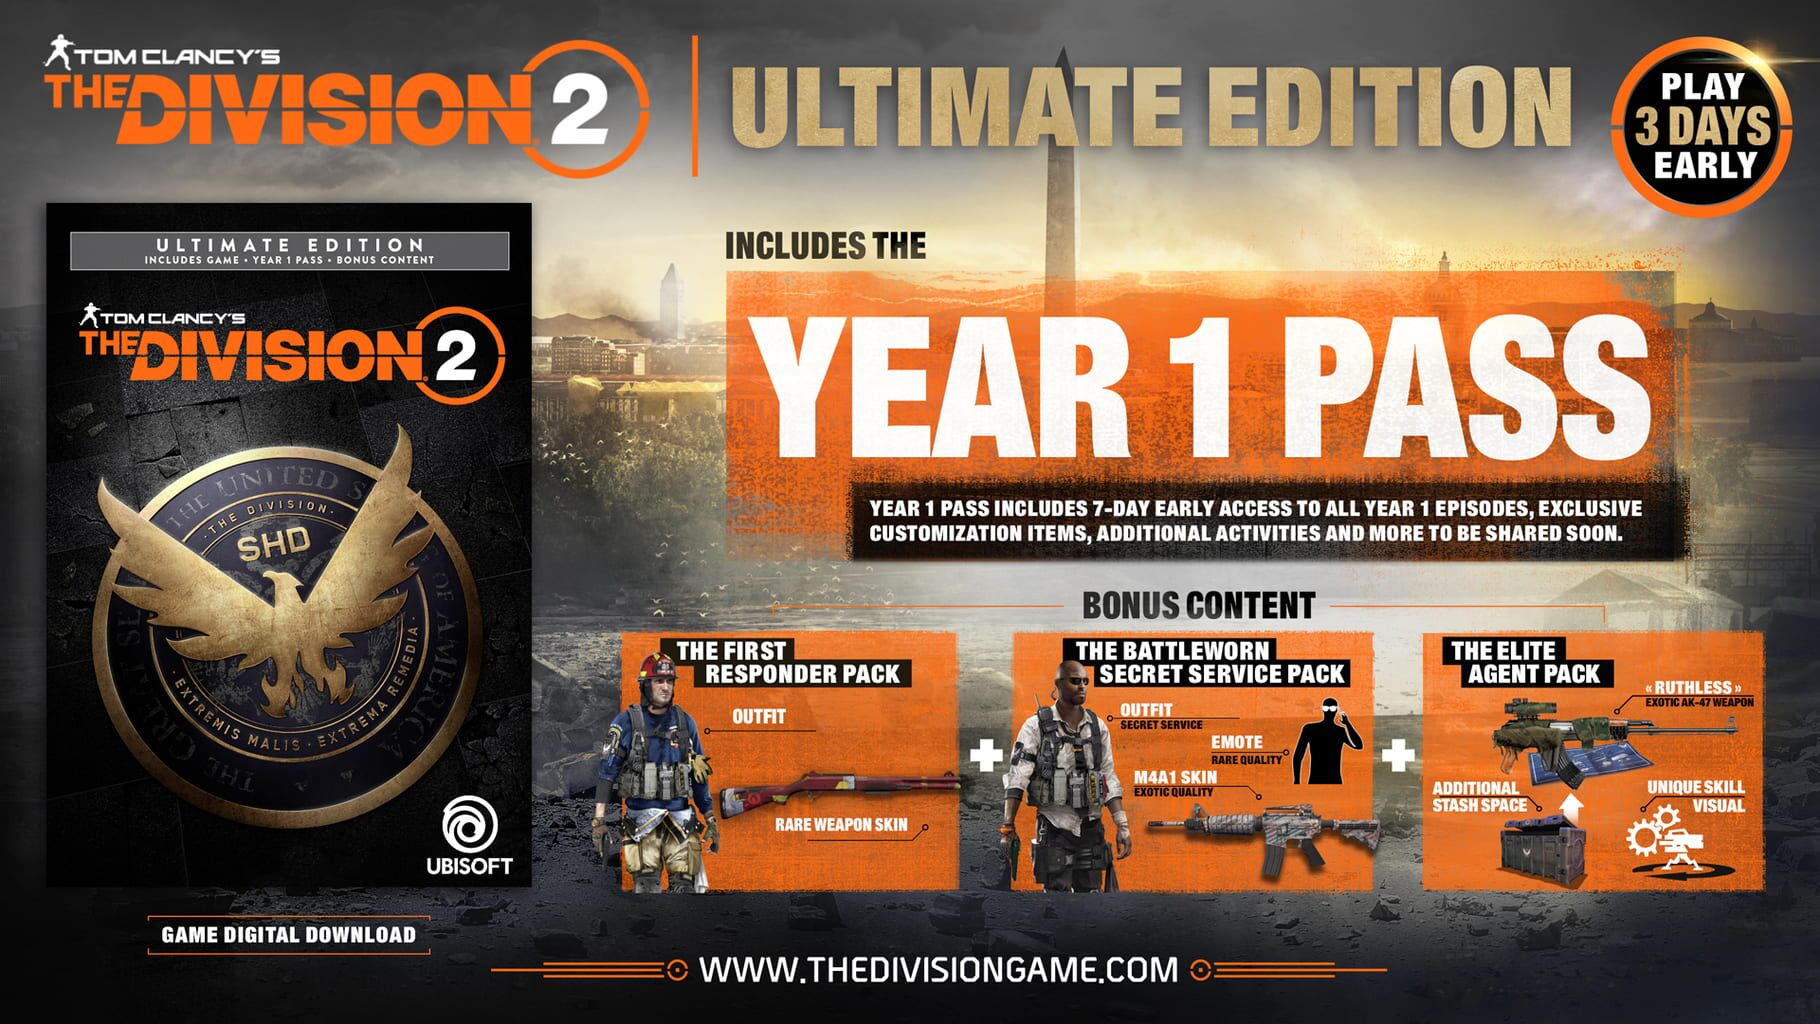 Tom Clancy's The Division 2: Ultimate Edition Image